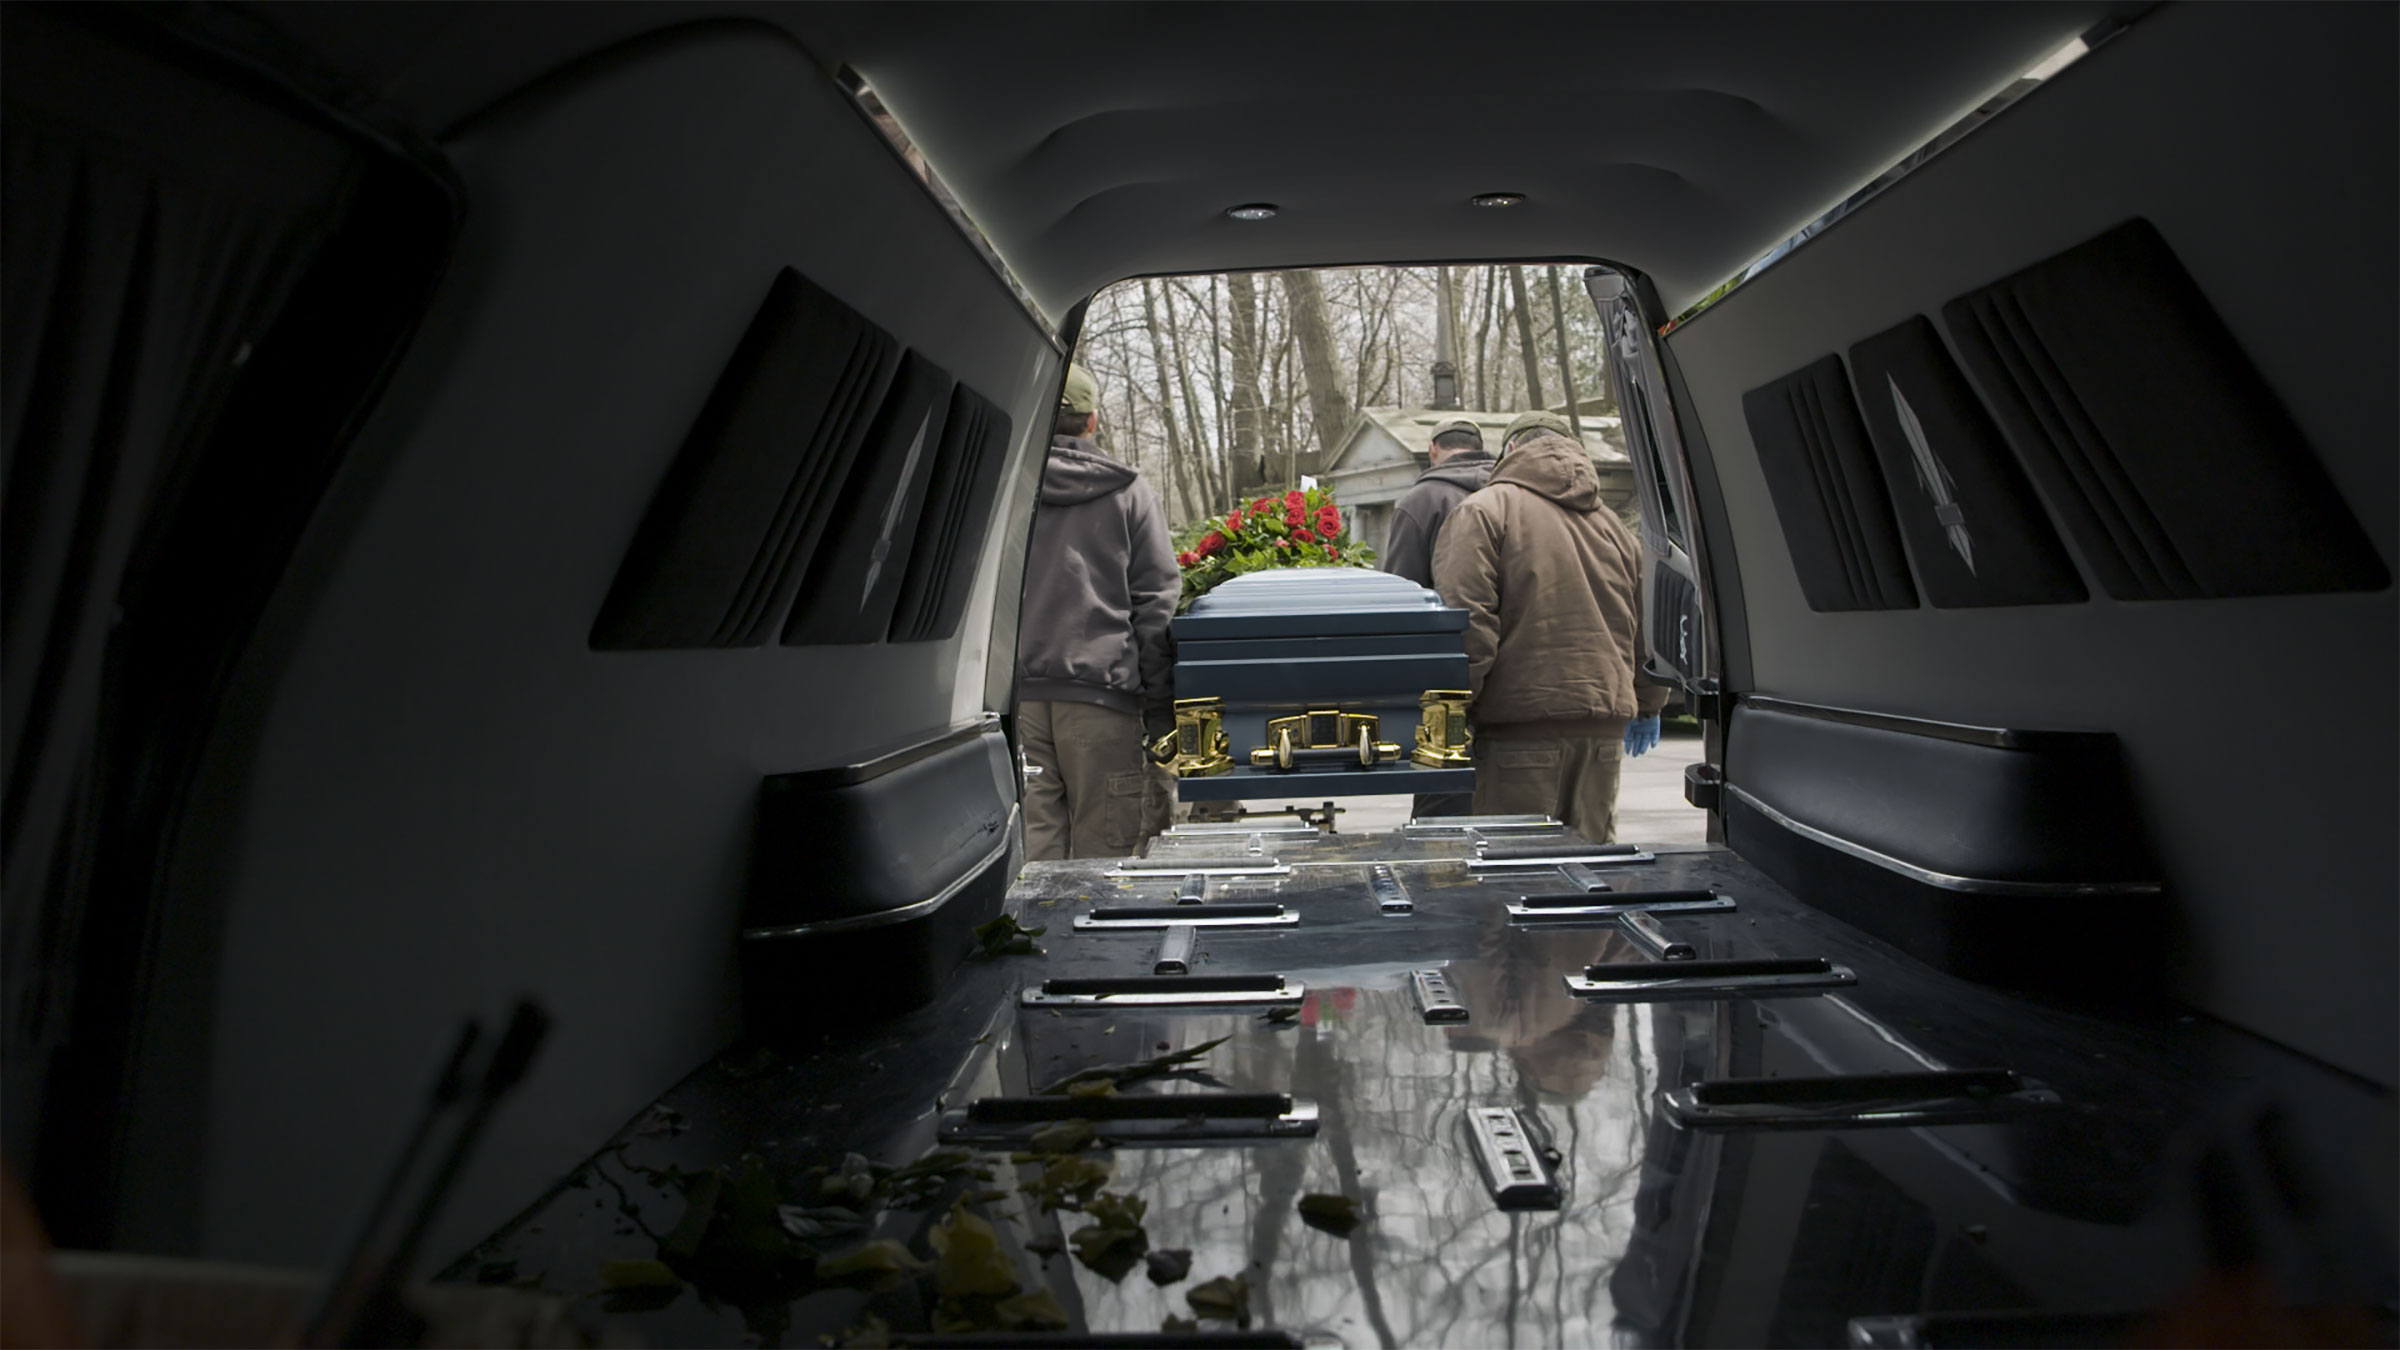 A casket is taken out of the back of a hearse at a cemetery